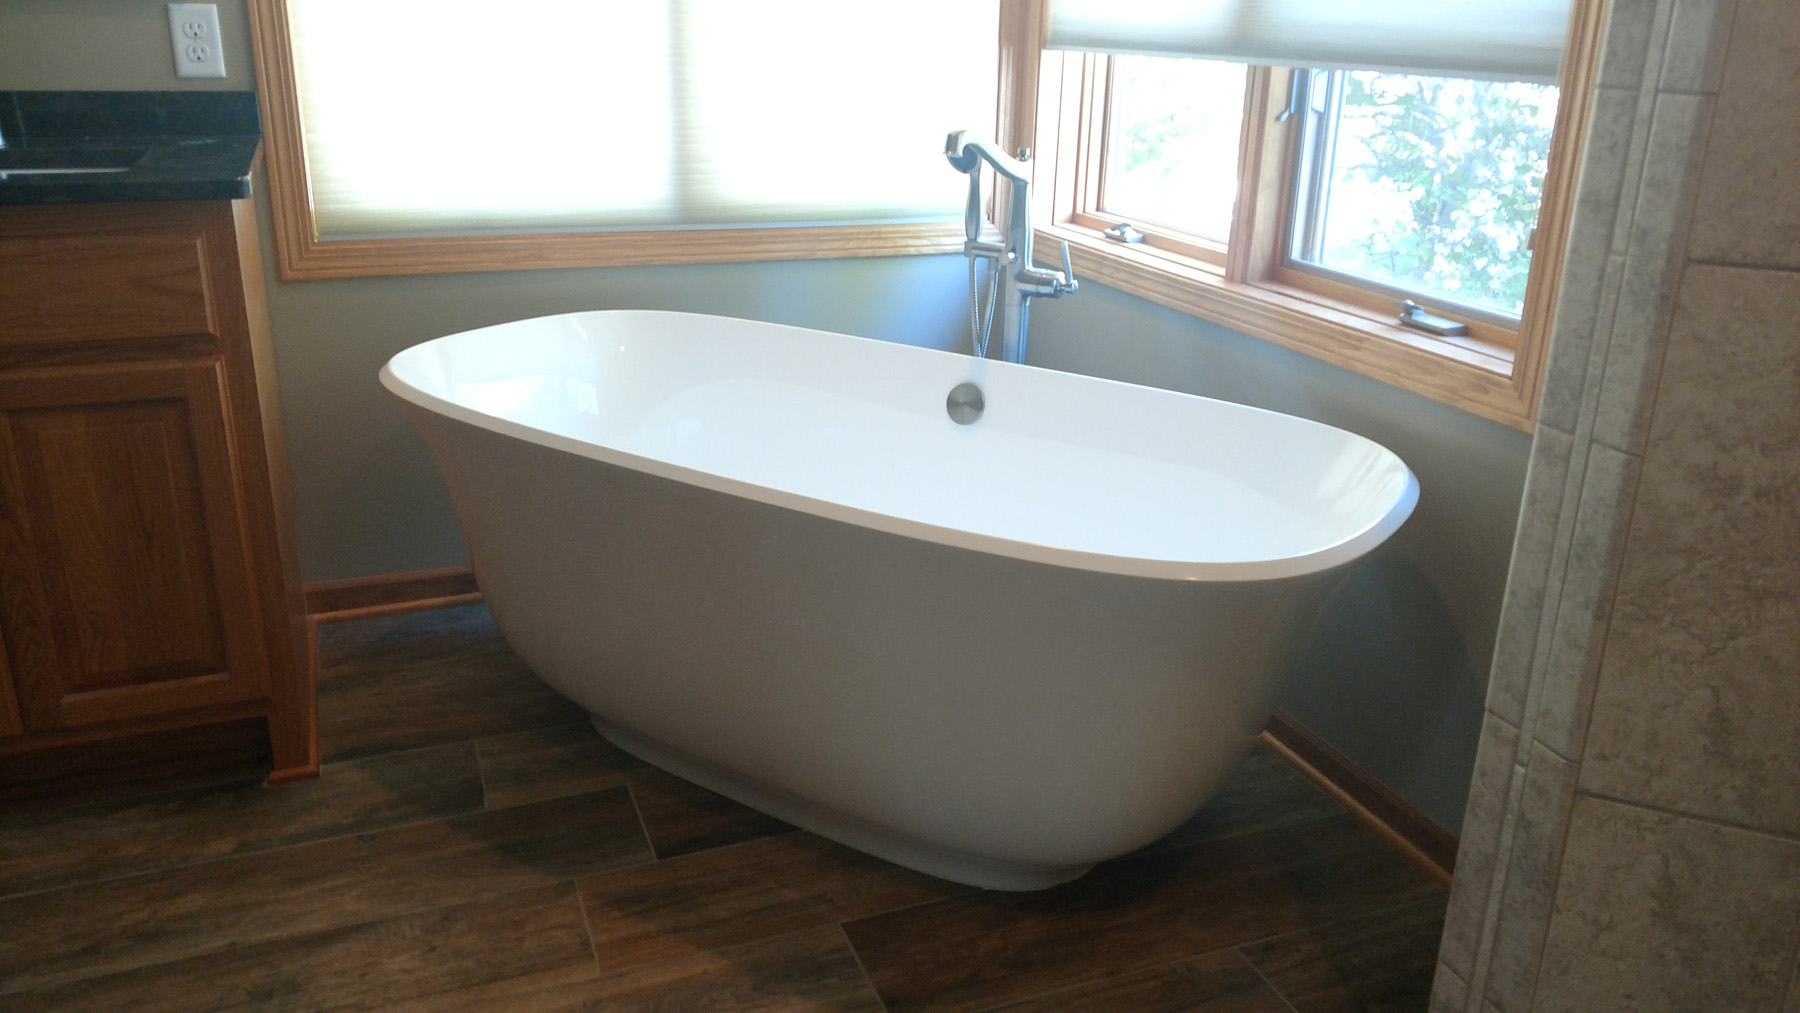 Free-standing soaking tub w/ floor mounted faucet